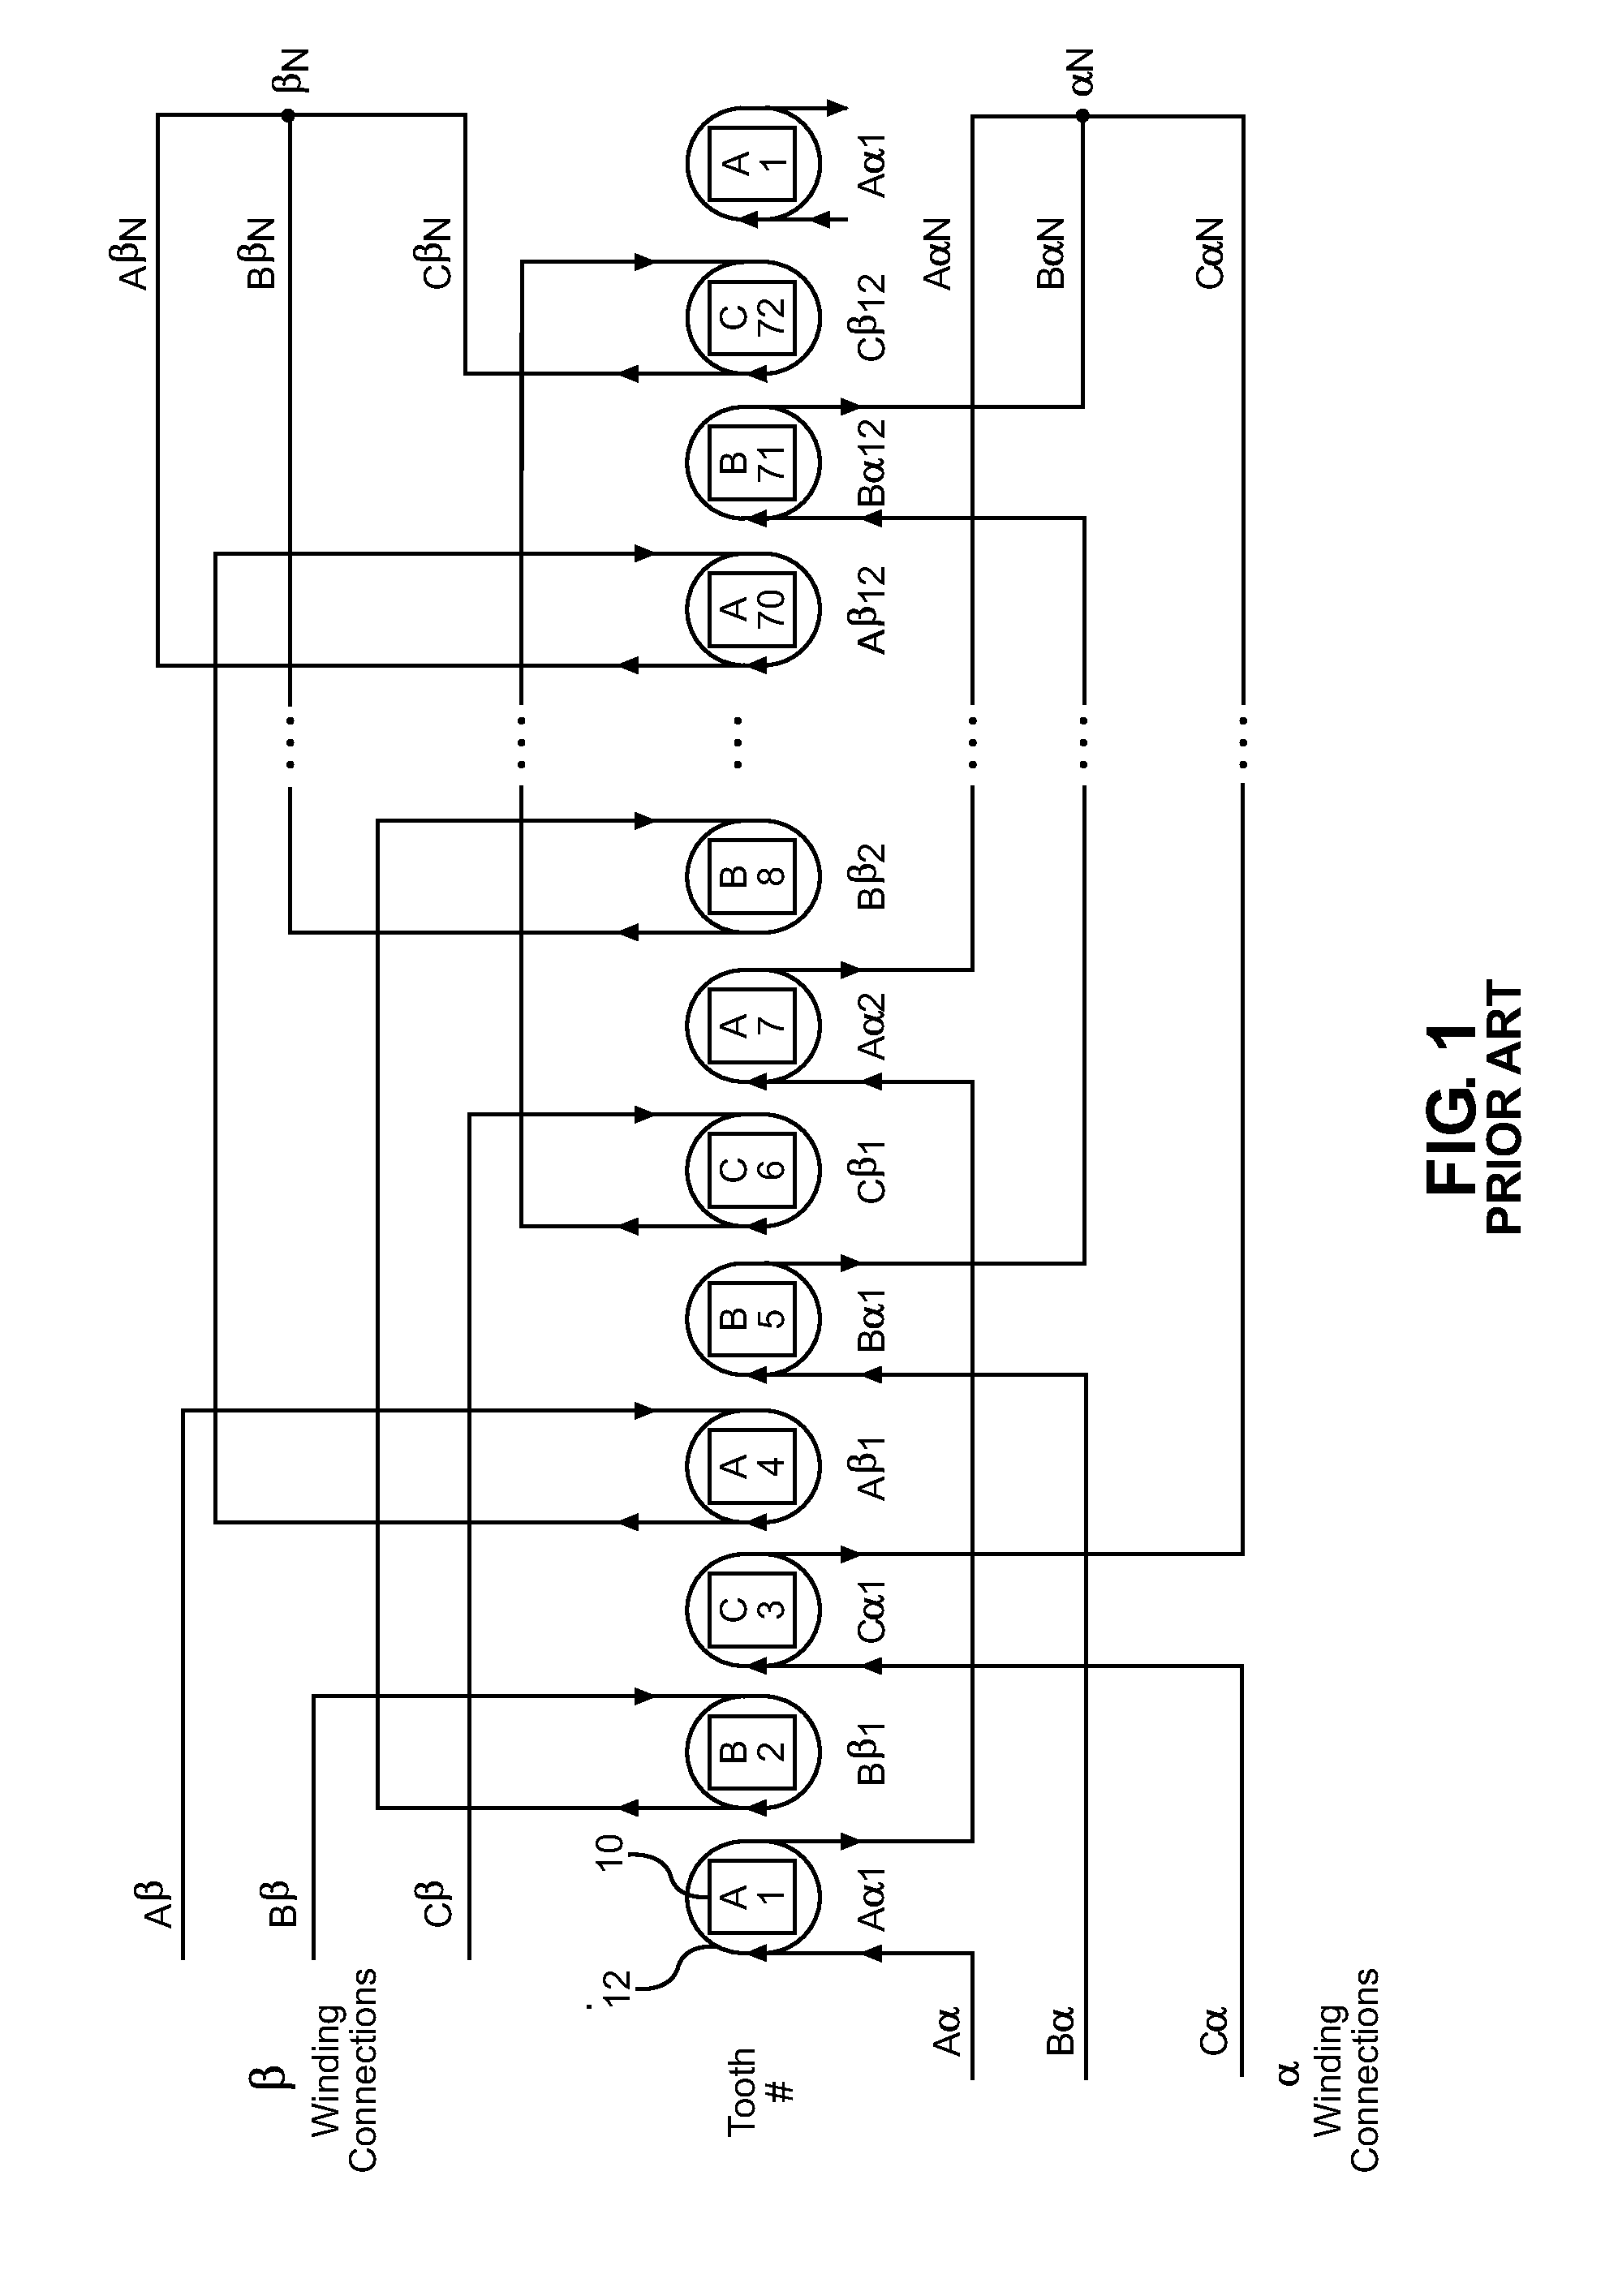 System and method for determining rotor shaft position of high voltage PM AC synchronous machines using auxiliary windings